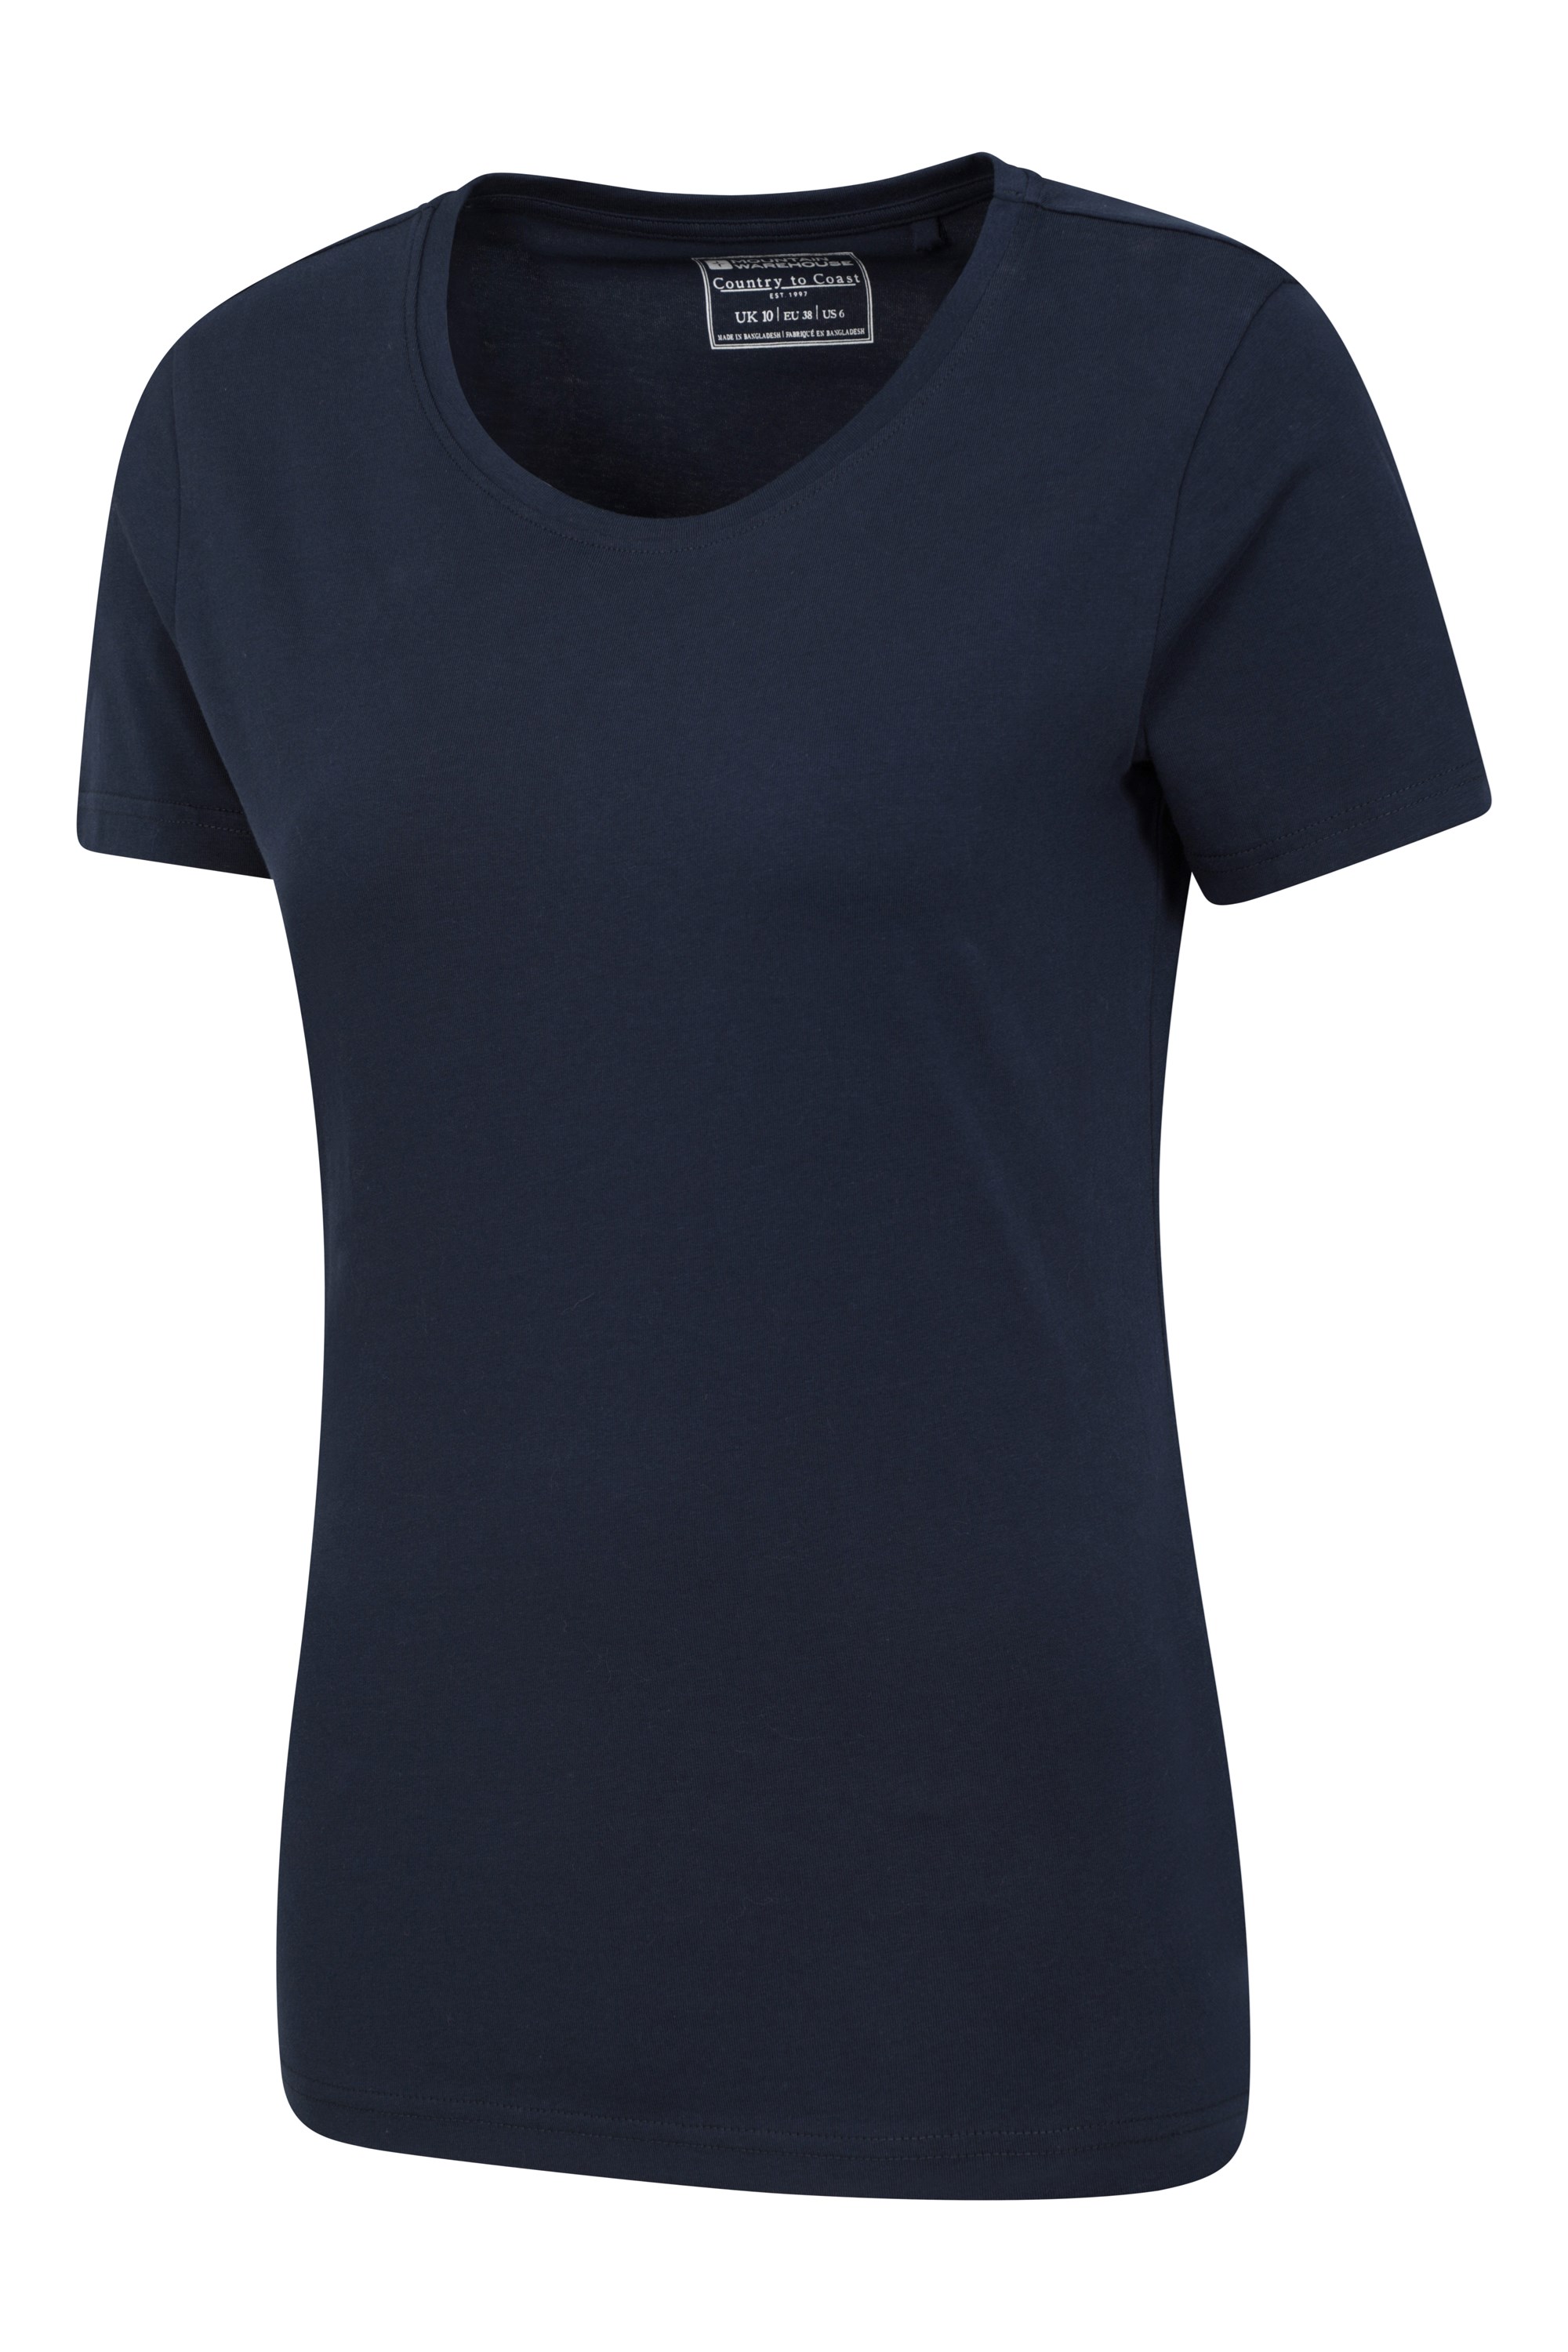 Women's Fitted T-Shirt Ladies Round Neck (size:1X- 17.5 Chest